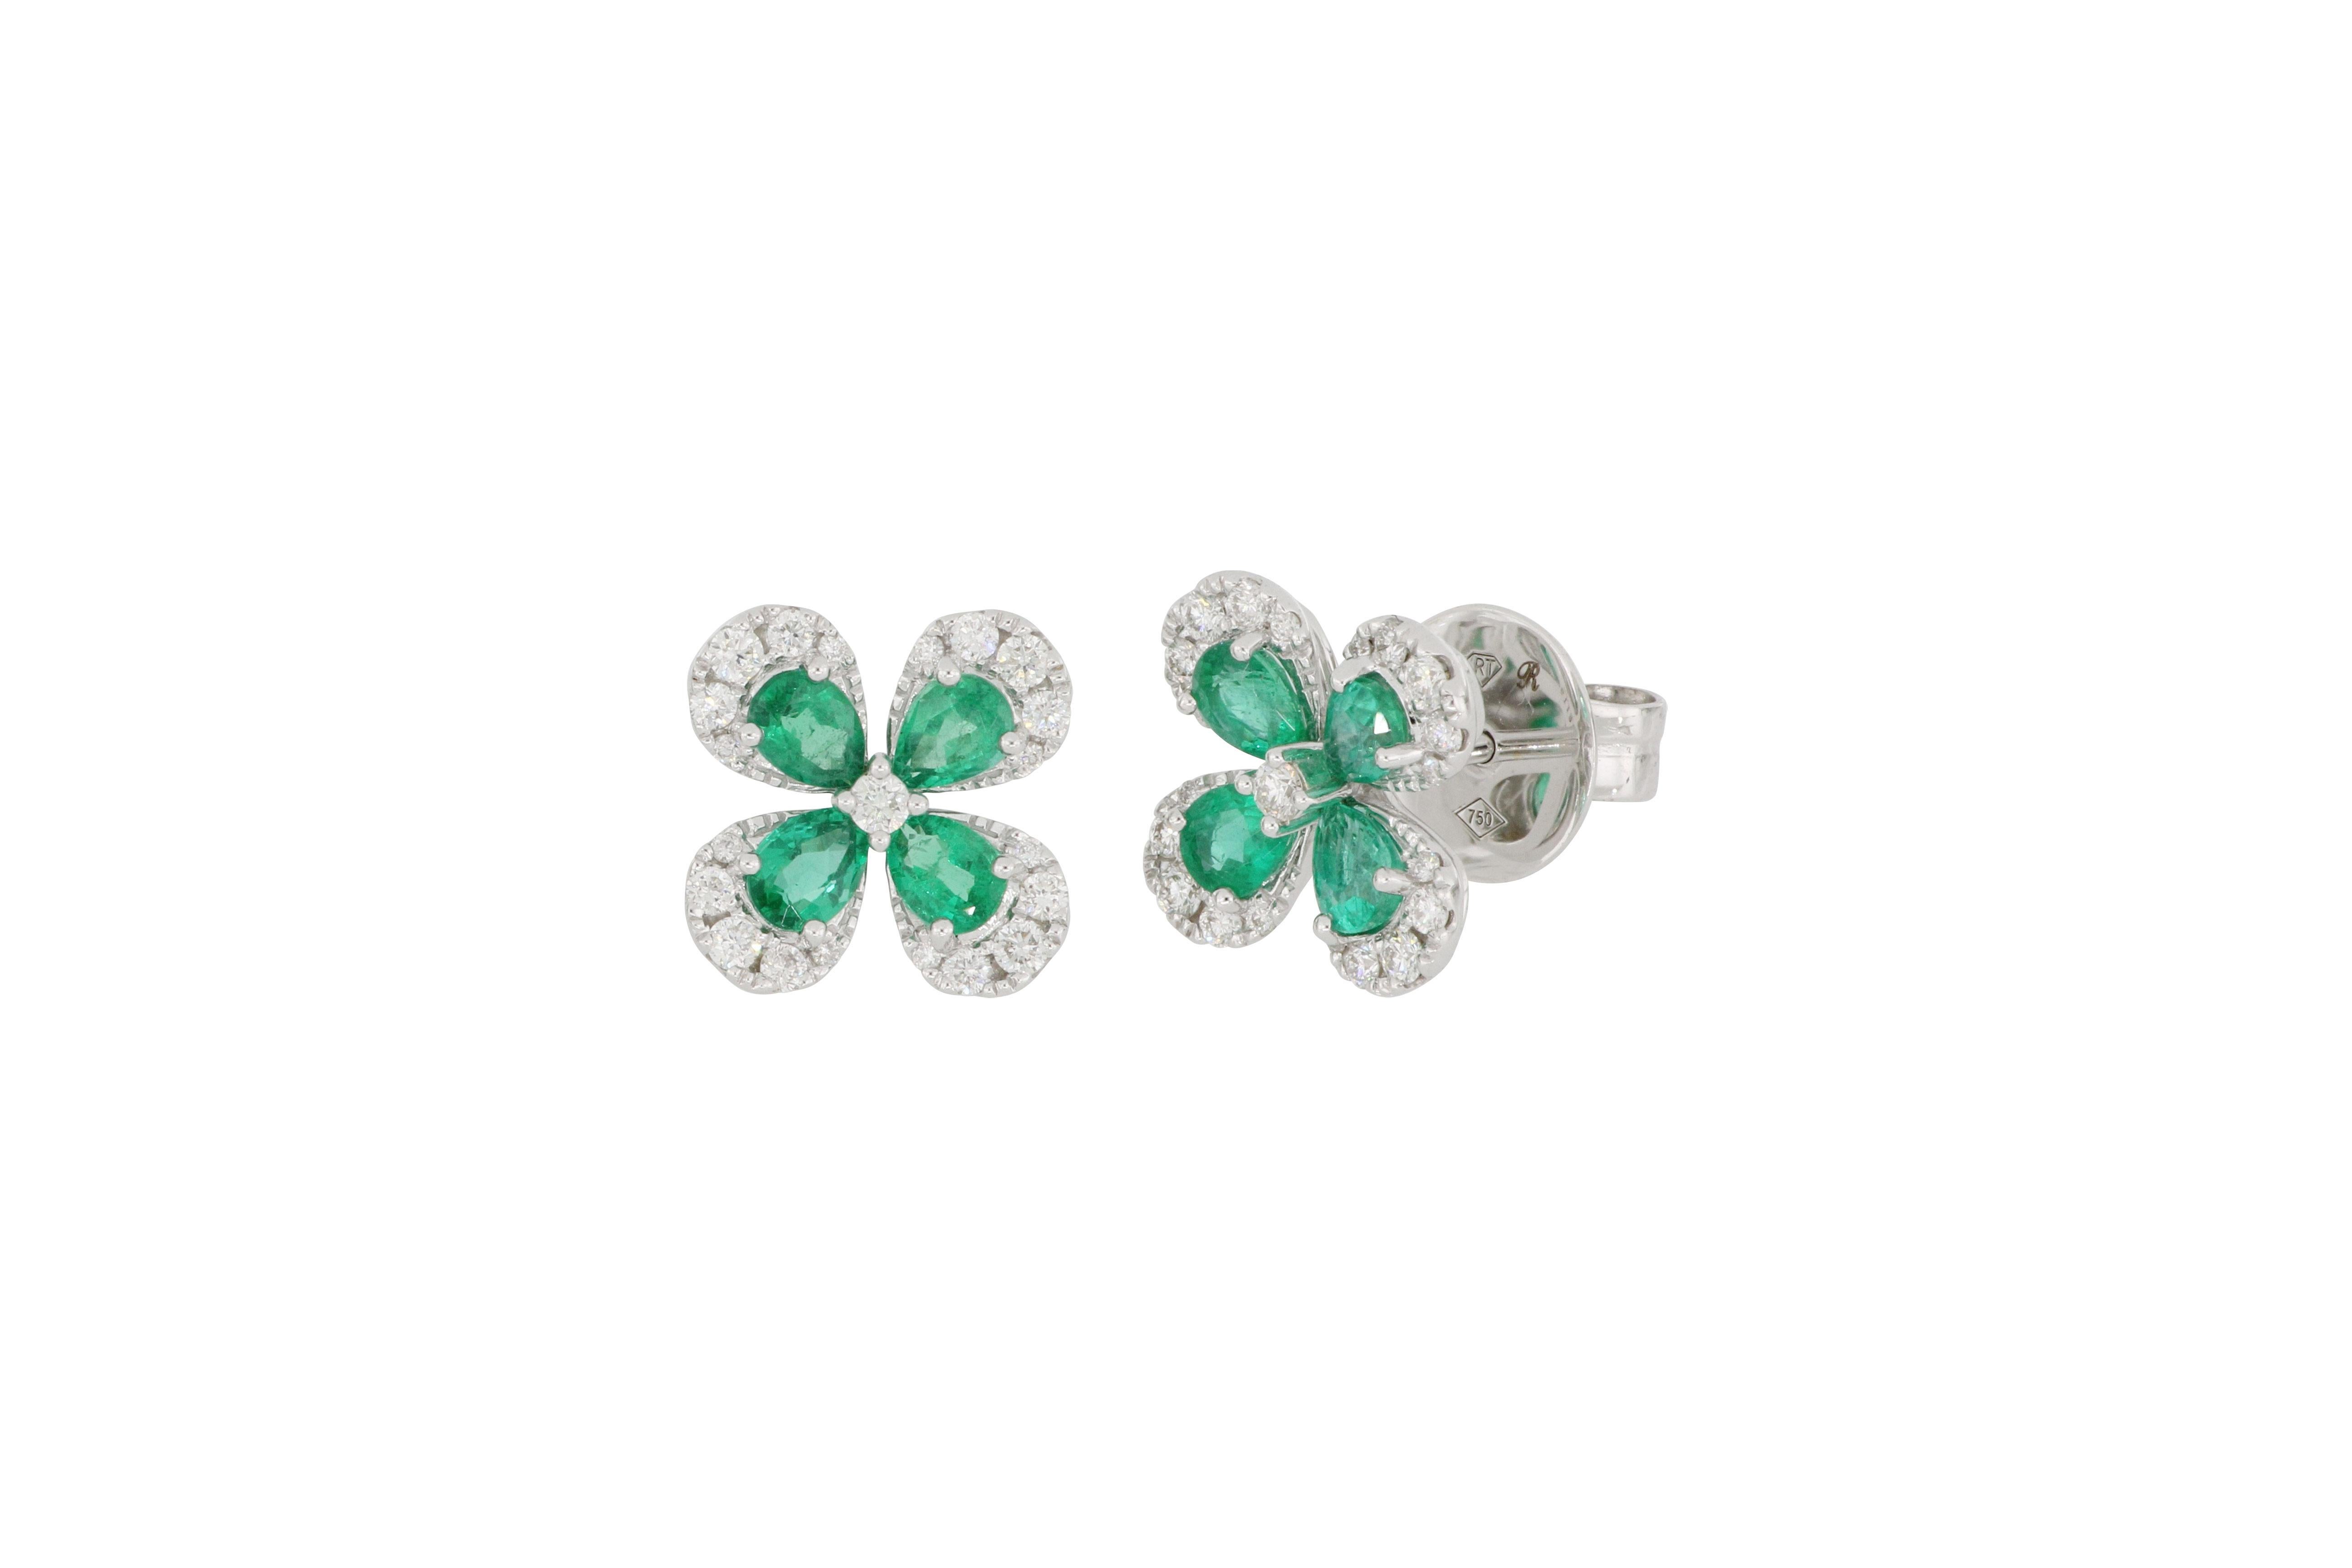 This pair of stylish earrings in the form of four leaf clover , simple and stylish, set with natural pear-cut emerald with beautiful green colour totaling 1.19 carats, decorated with brilliant-cut diamonds weighing 0.36 carats, mounted in 18 karat